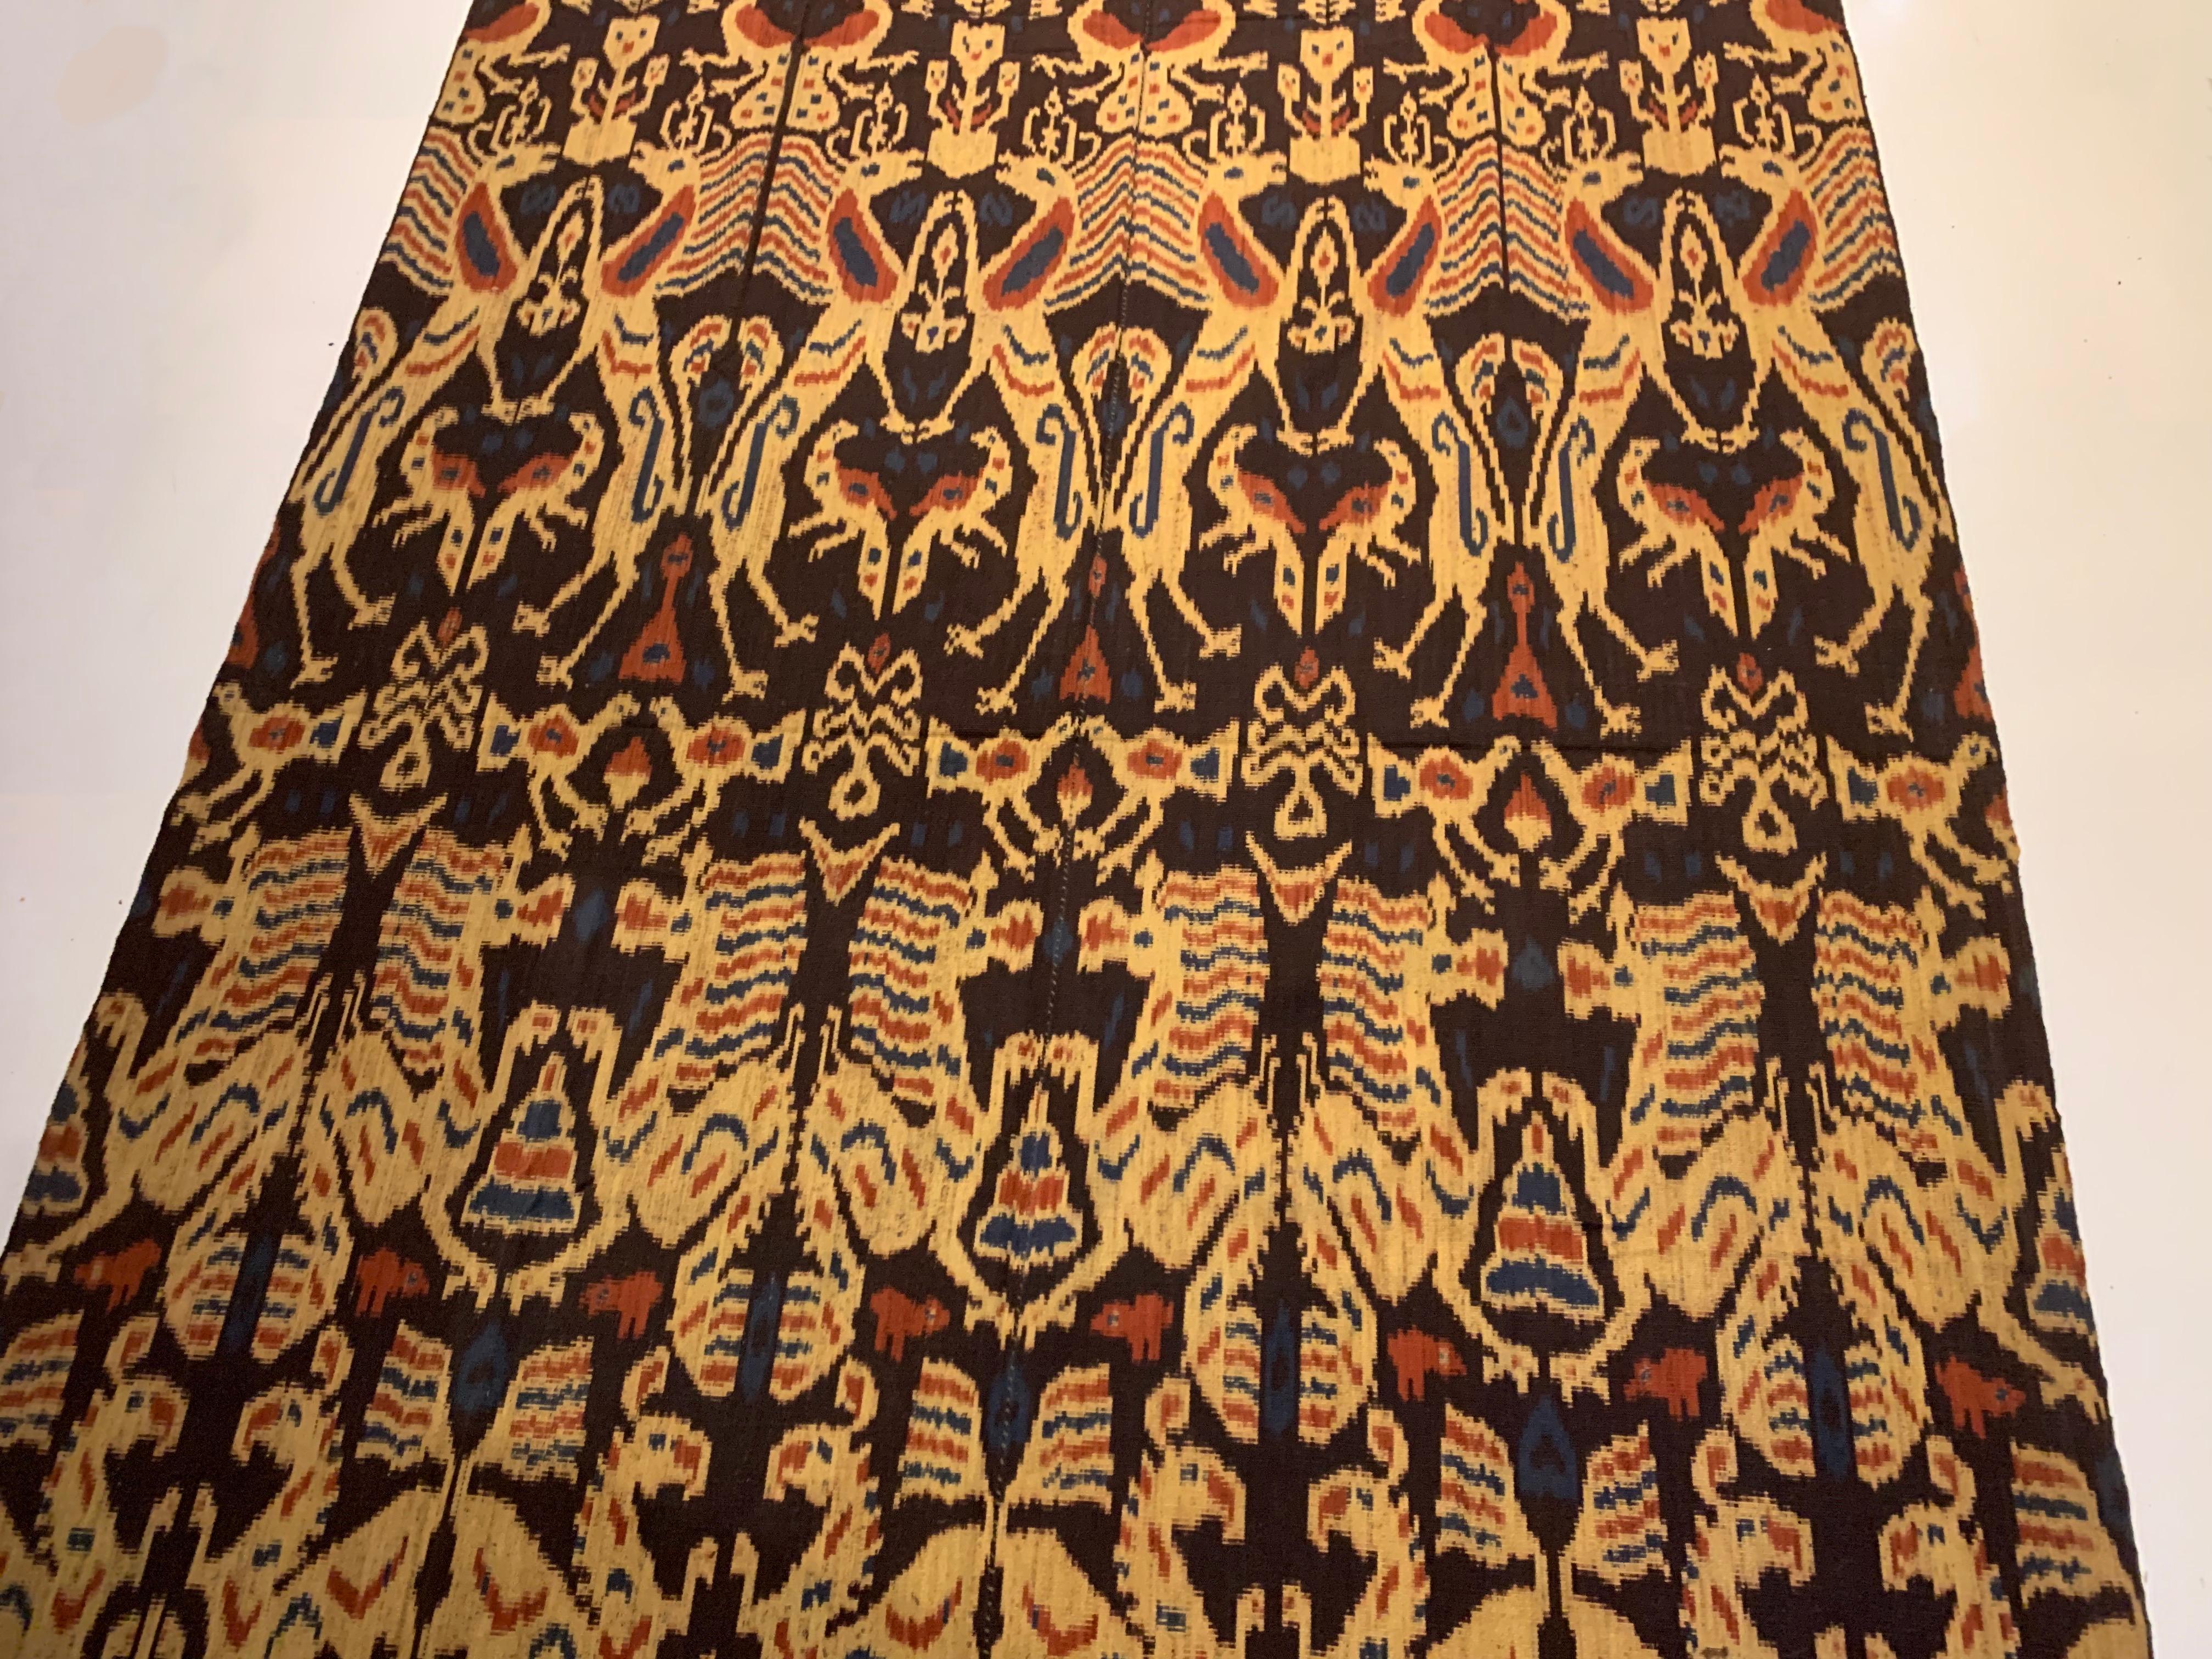 This Ikat textile originates from the Island of Sumba, Indonesia. It is hand-woven using naturally dyed yarns via a method passed on through generations. It features a stunning array of distinct tribal patterns and motifs.An intricate ikat such as